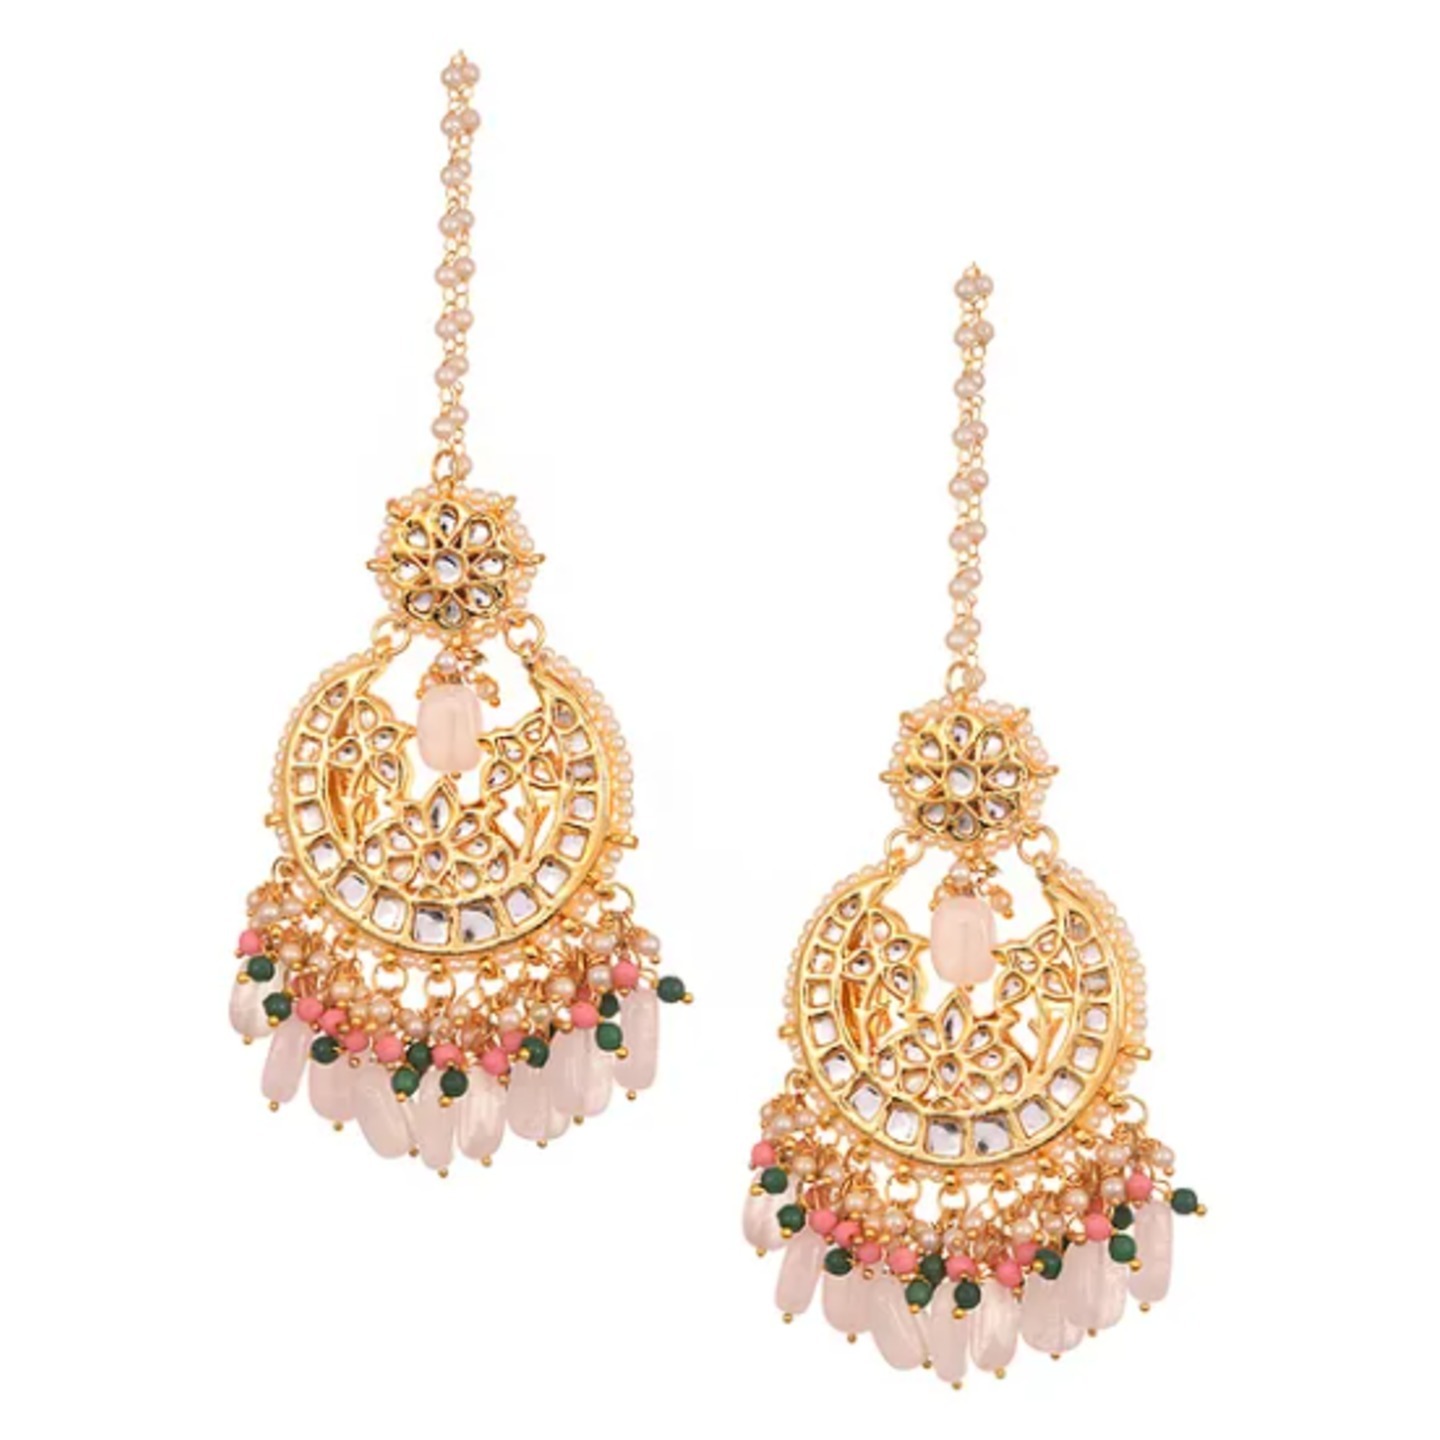 Pink Gold Tone Kundan Earring With Ear Chains